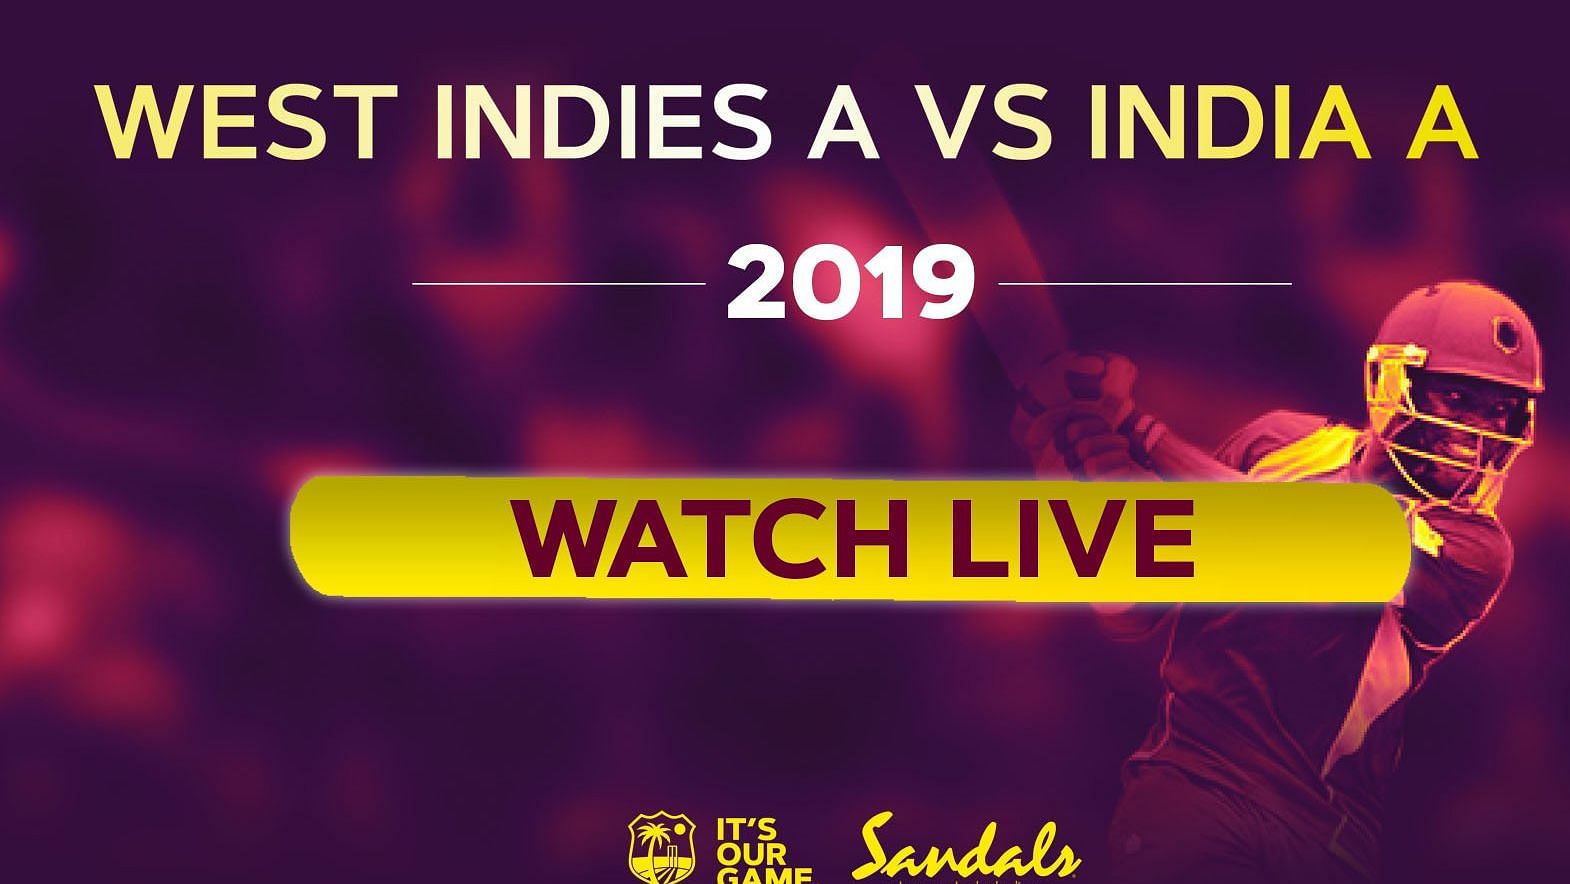 India A vs West Indies A Unofficial Test Match Live Streaming: India A will be playing against West Indies A in the 2nd unofficial Test starting today.